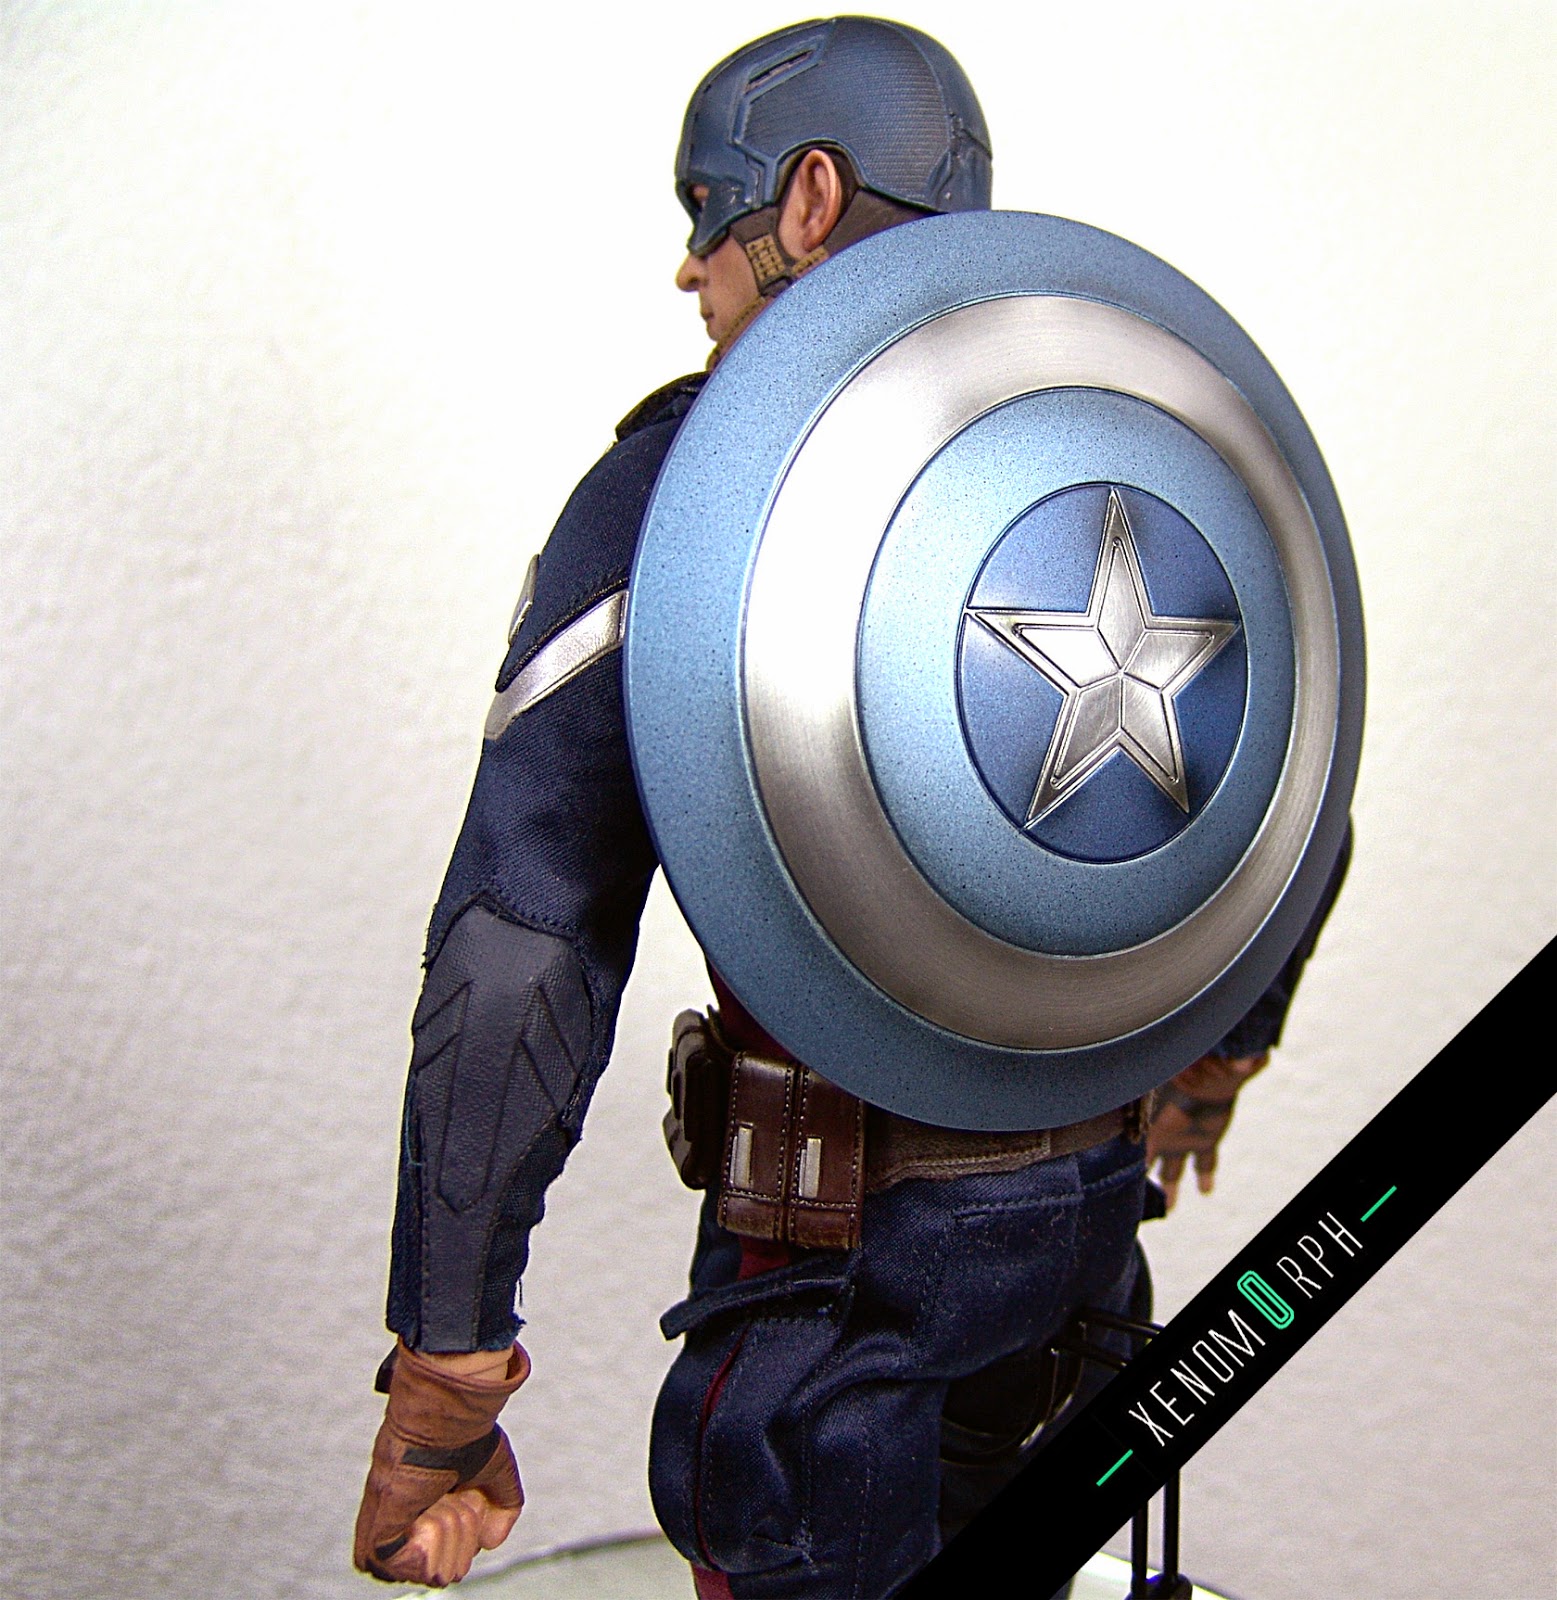 Hot Toys Captain America Stealth Suit - 1/6 MMS242 video and photo review.